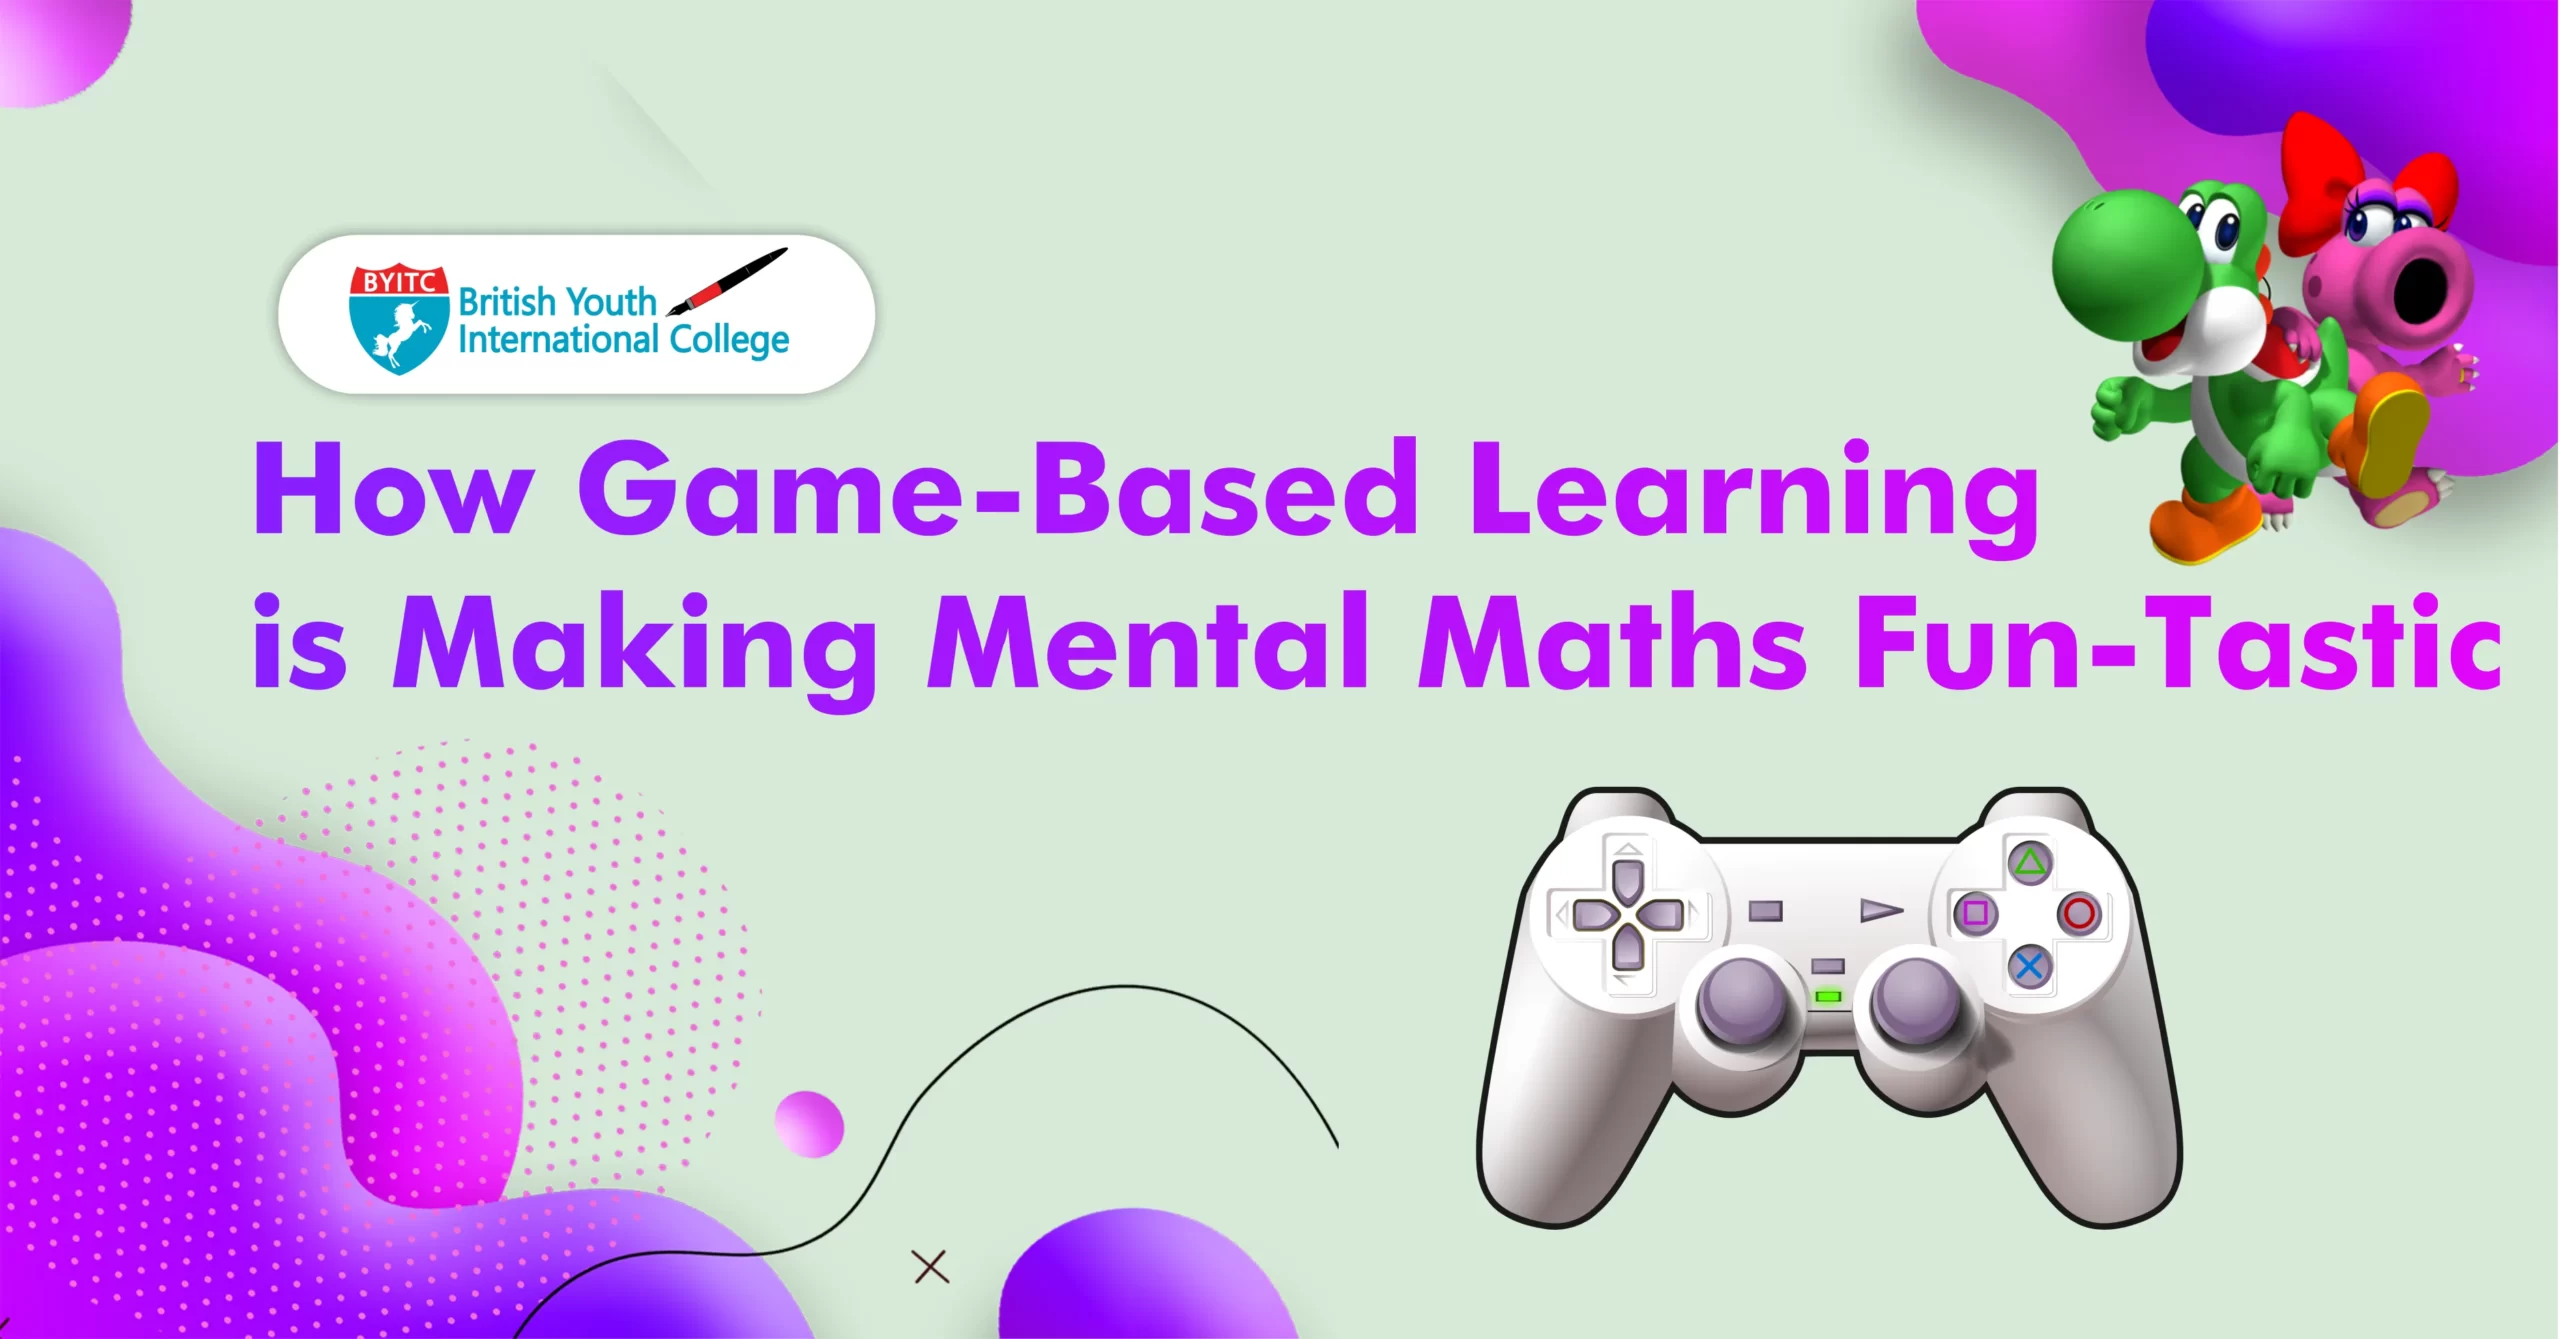 How Game-Based Learning is Making Mental Maths Fun-Tastic